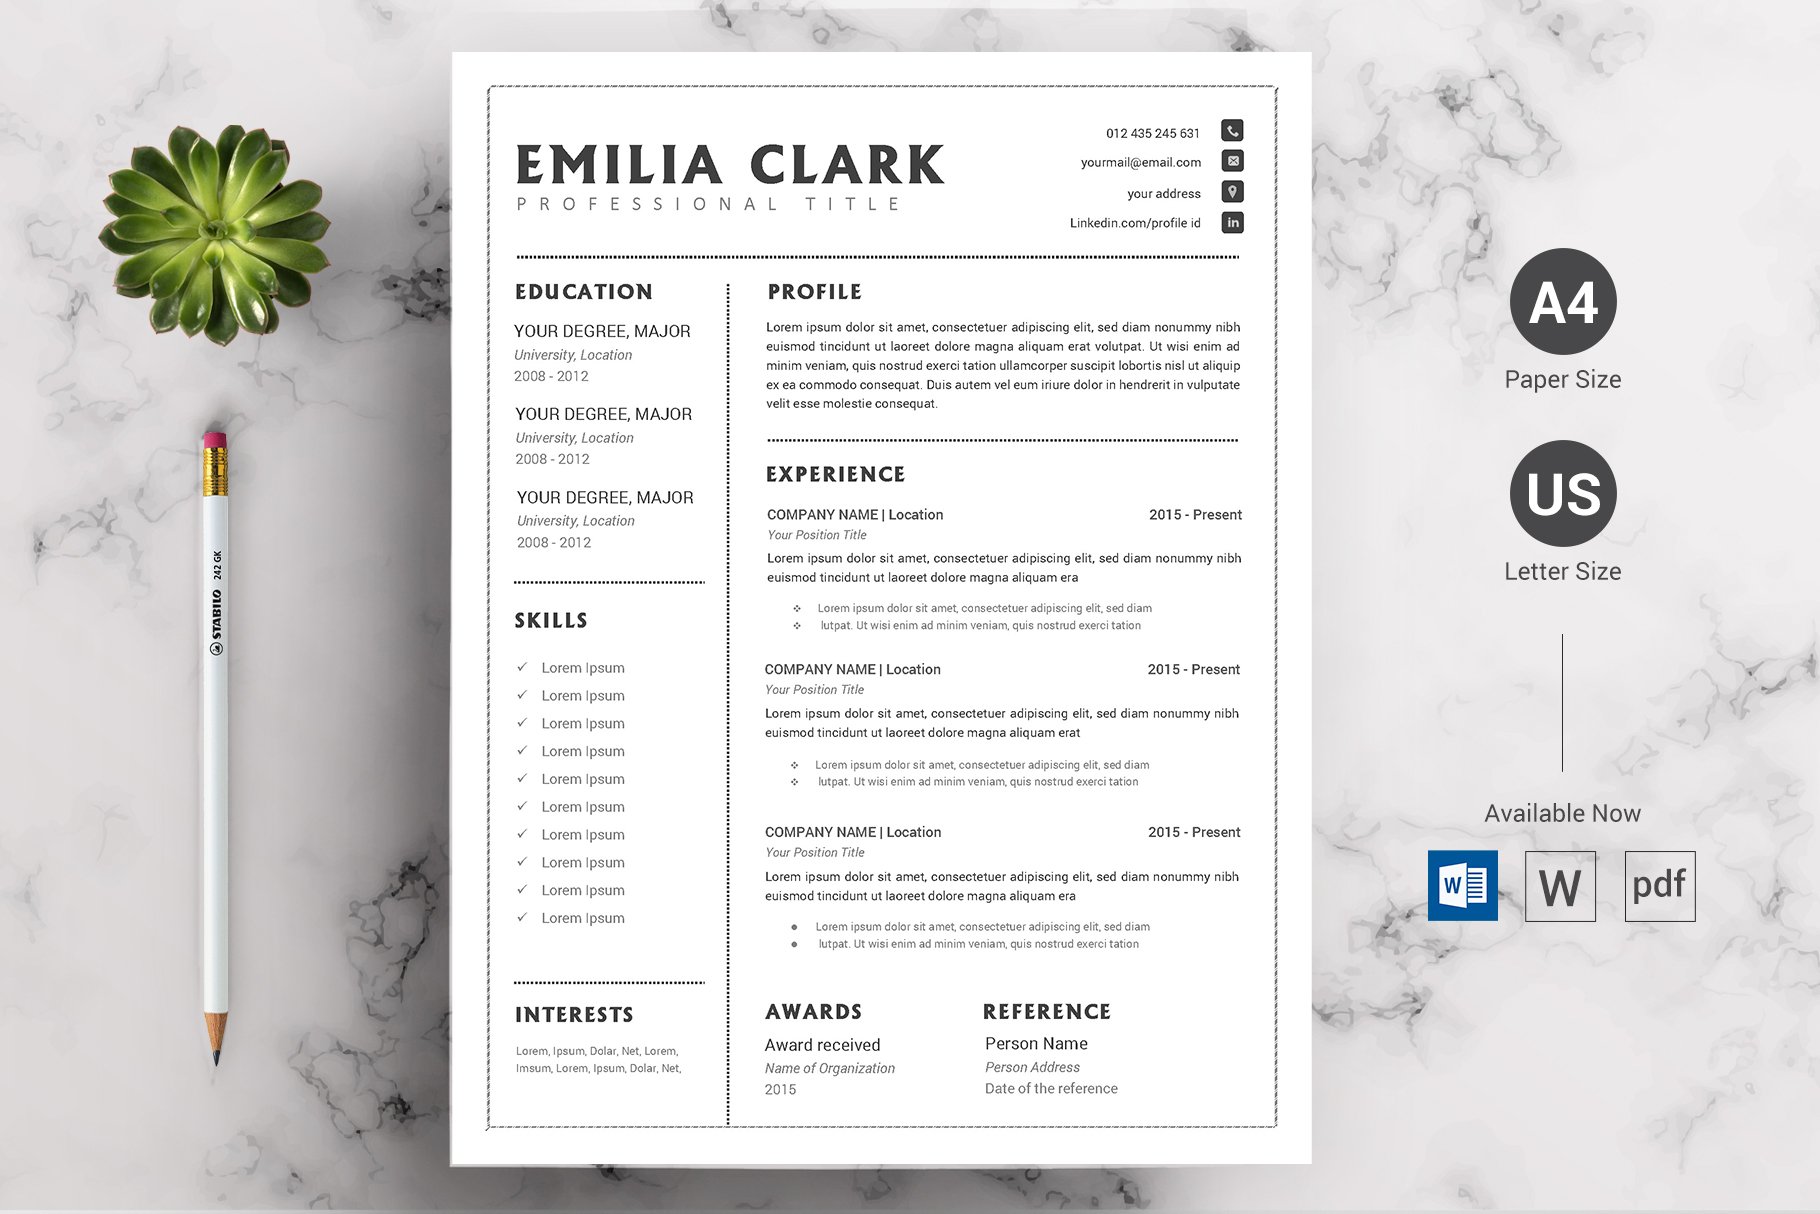 CV Resume Word Docx Template cover image.